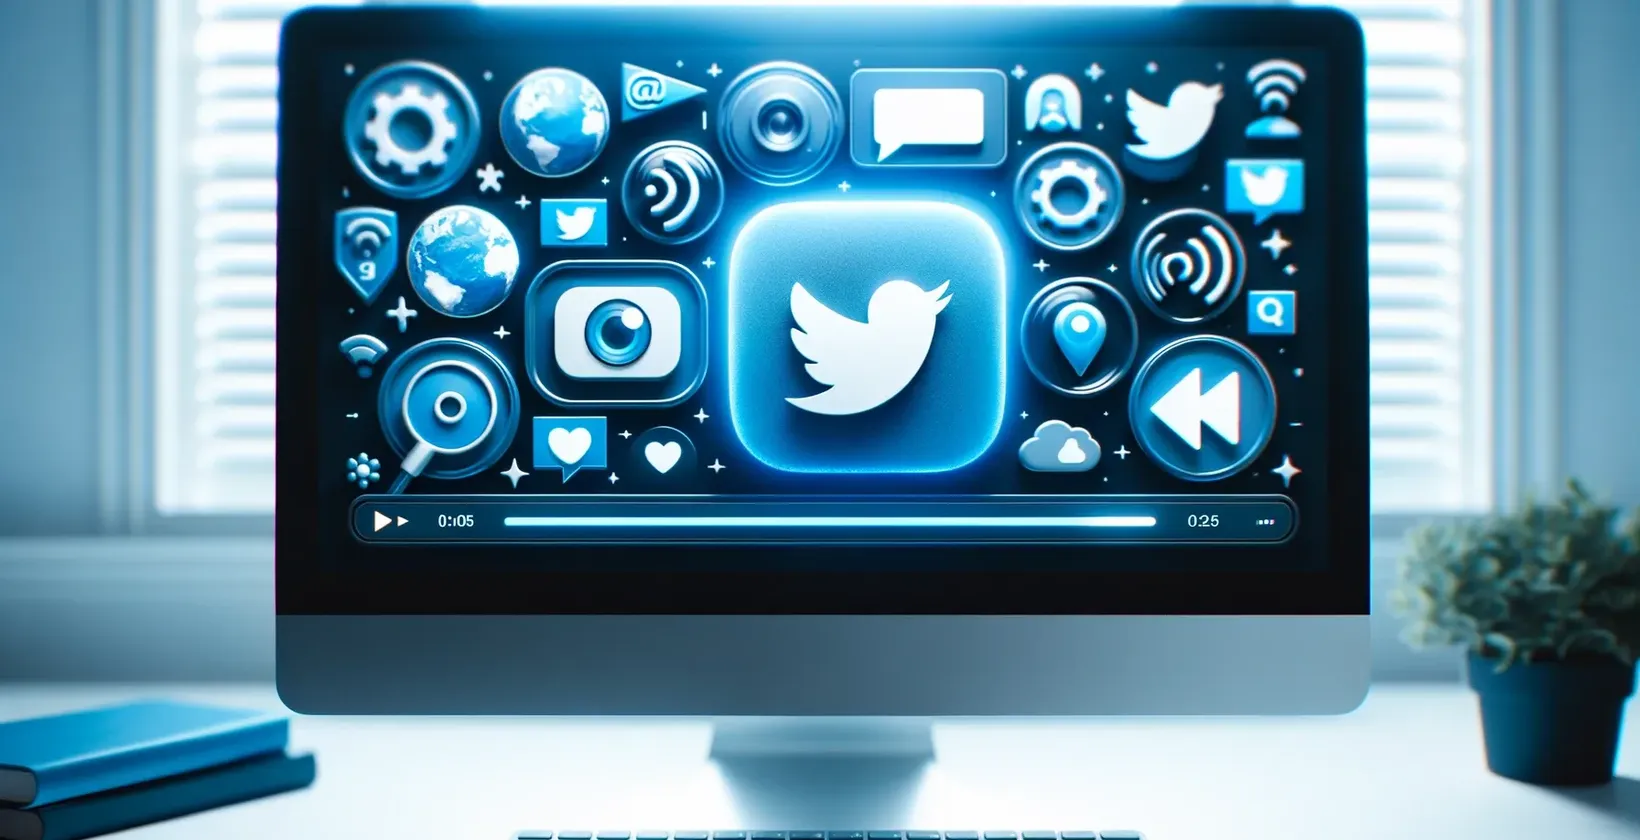 Twitter videos captions displayed on a monitor with icons emphasizing global connectivity and media controls